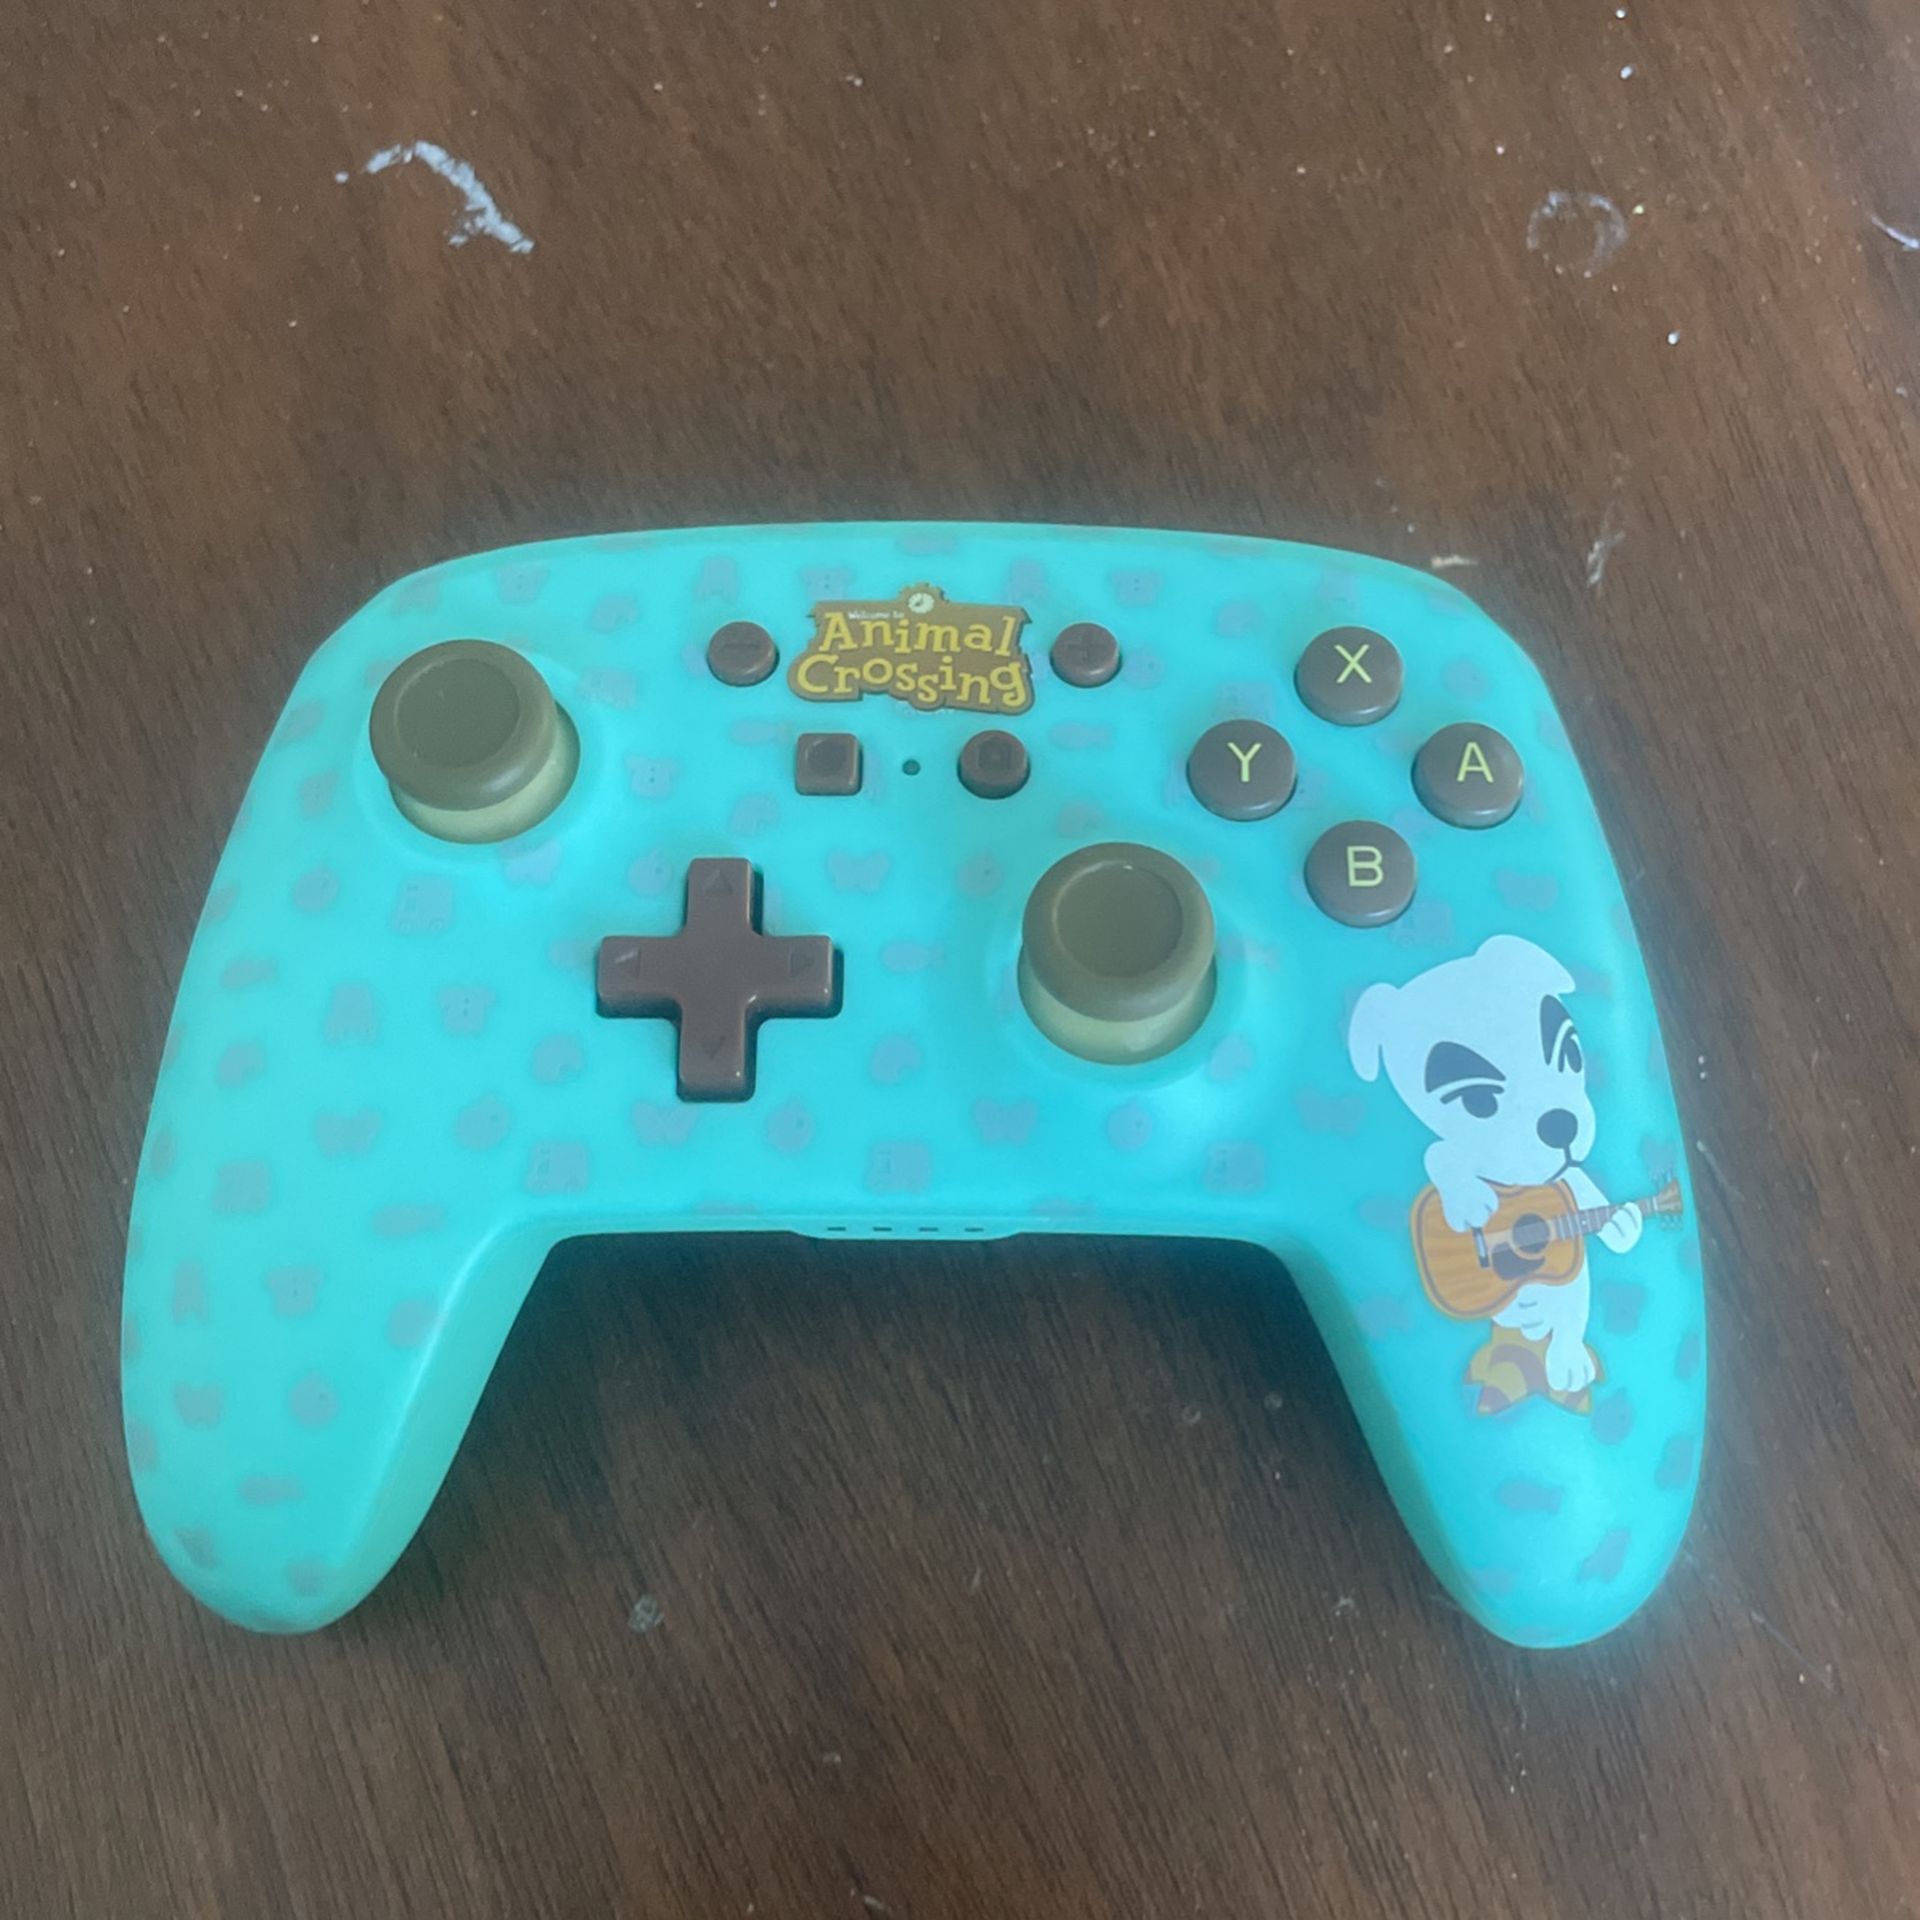 It Is In Nintendo Pro Controller And It’s Colored With Animal Crossing 